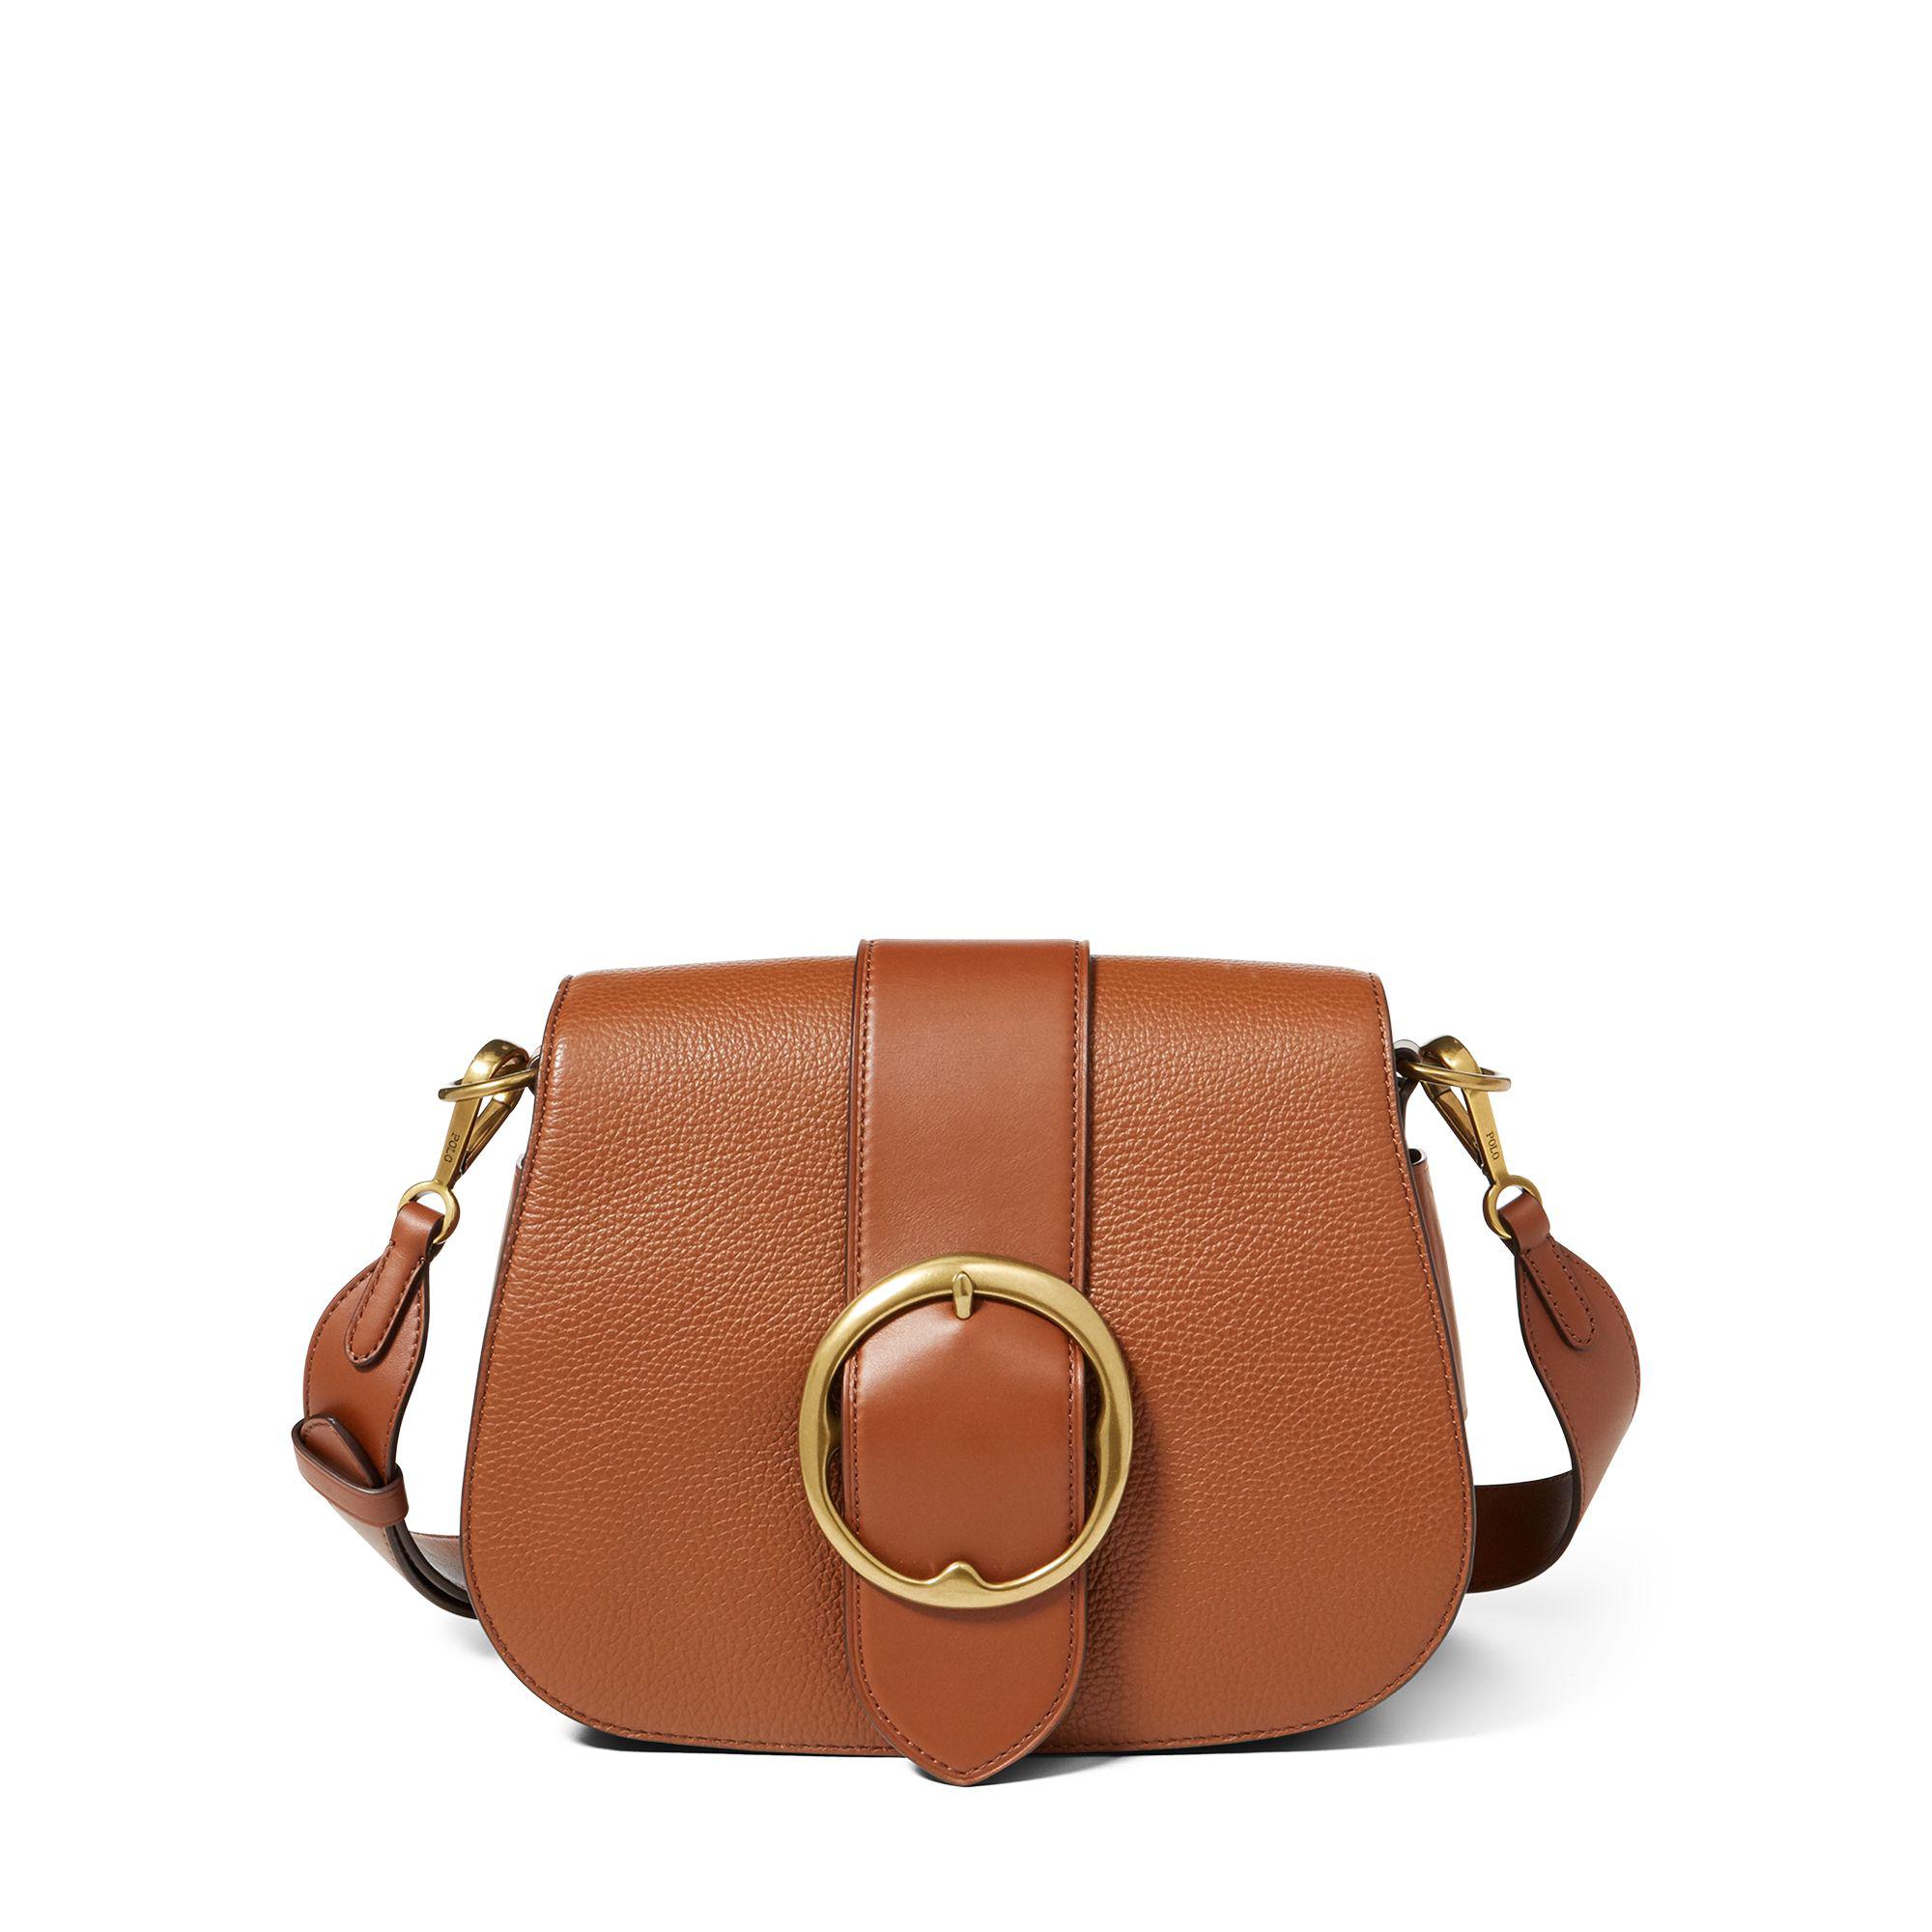 Polo Ralph Lauren Leather Large Belt Saddle Bag in Brown | Lyst